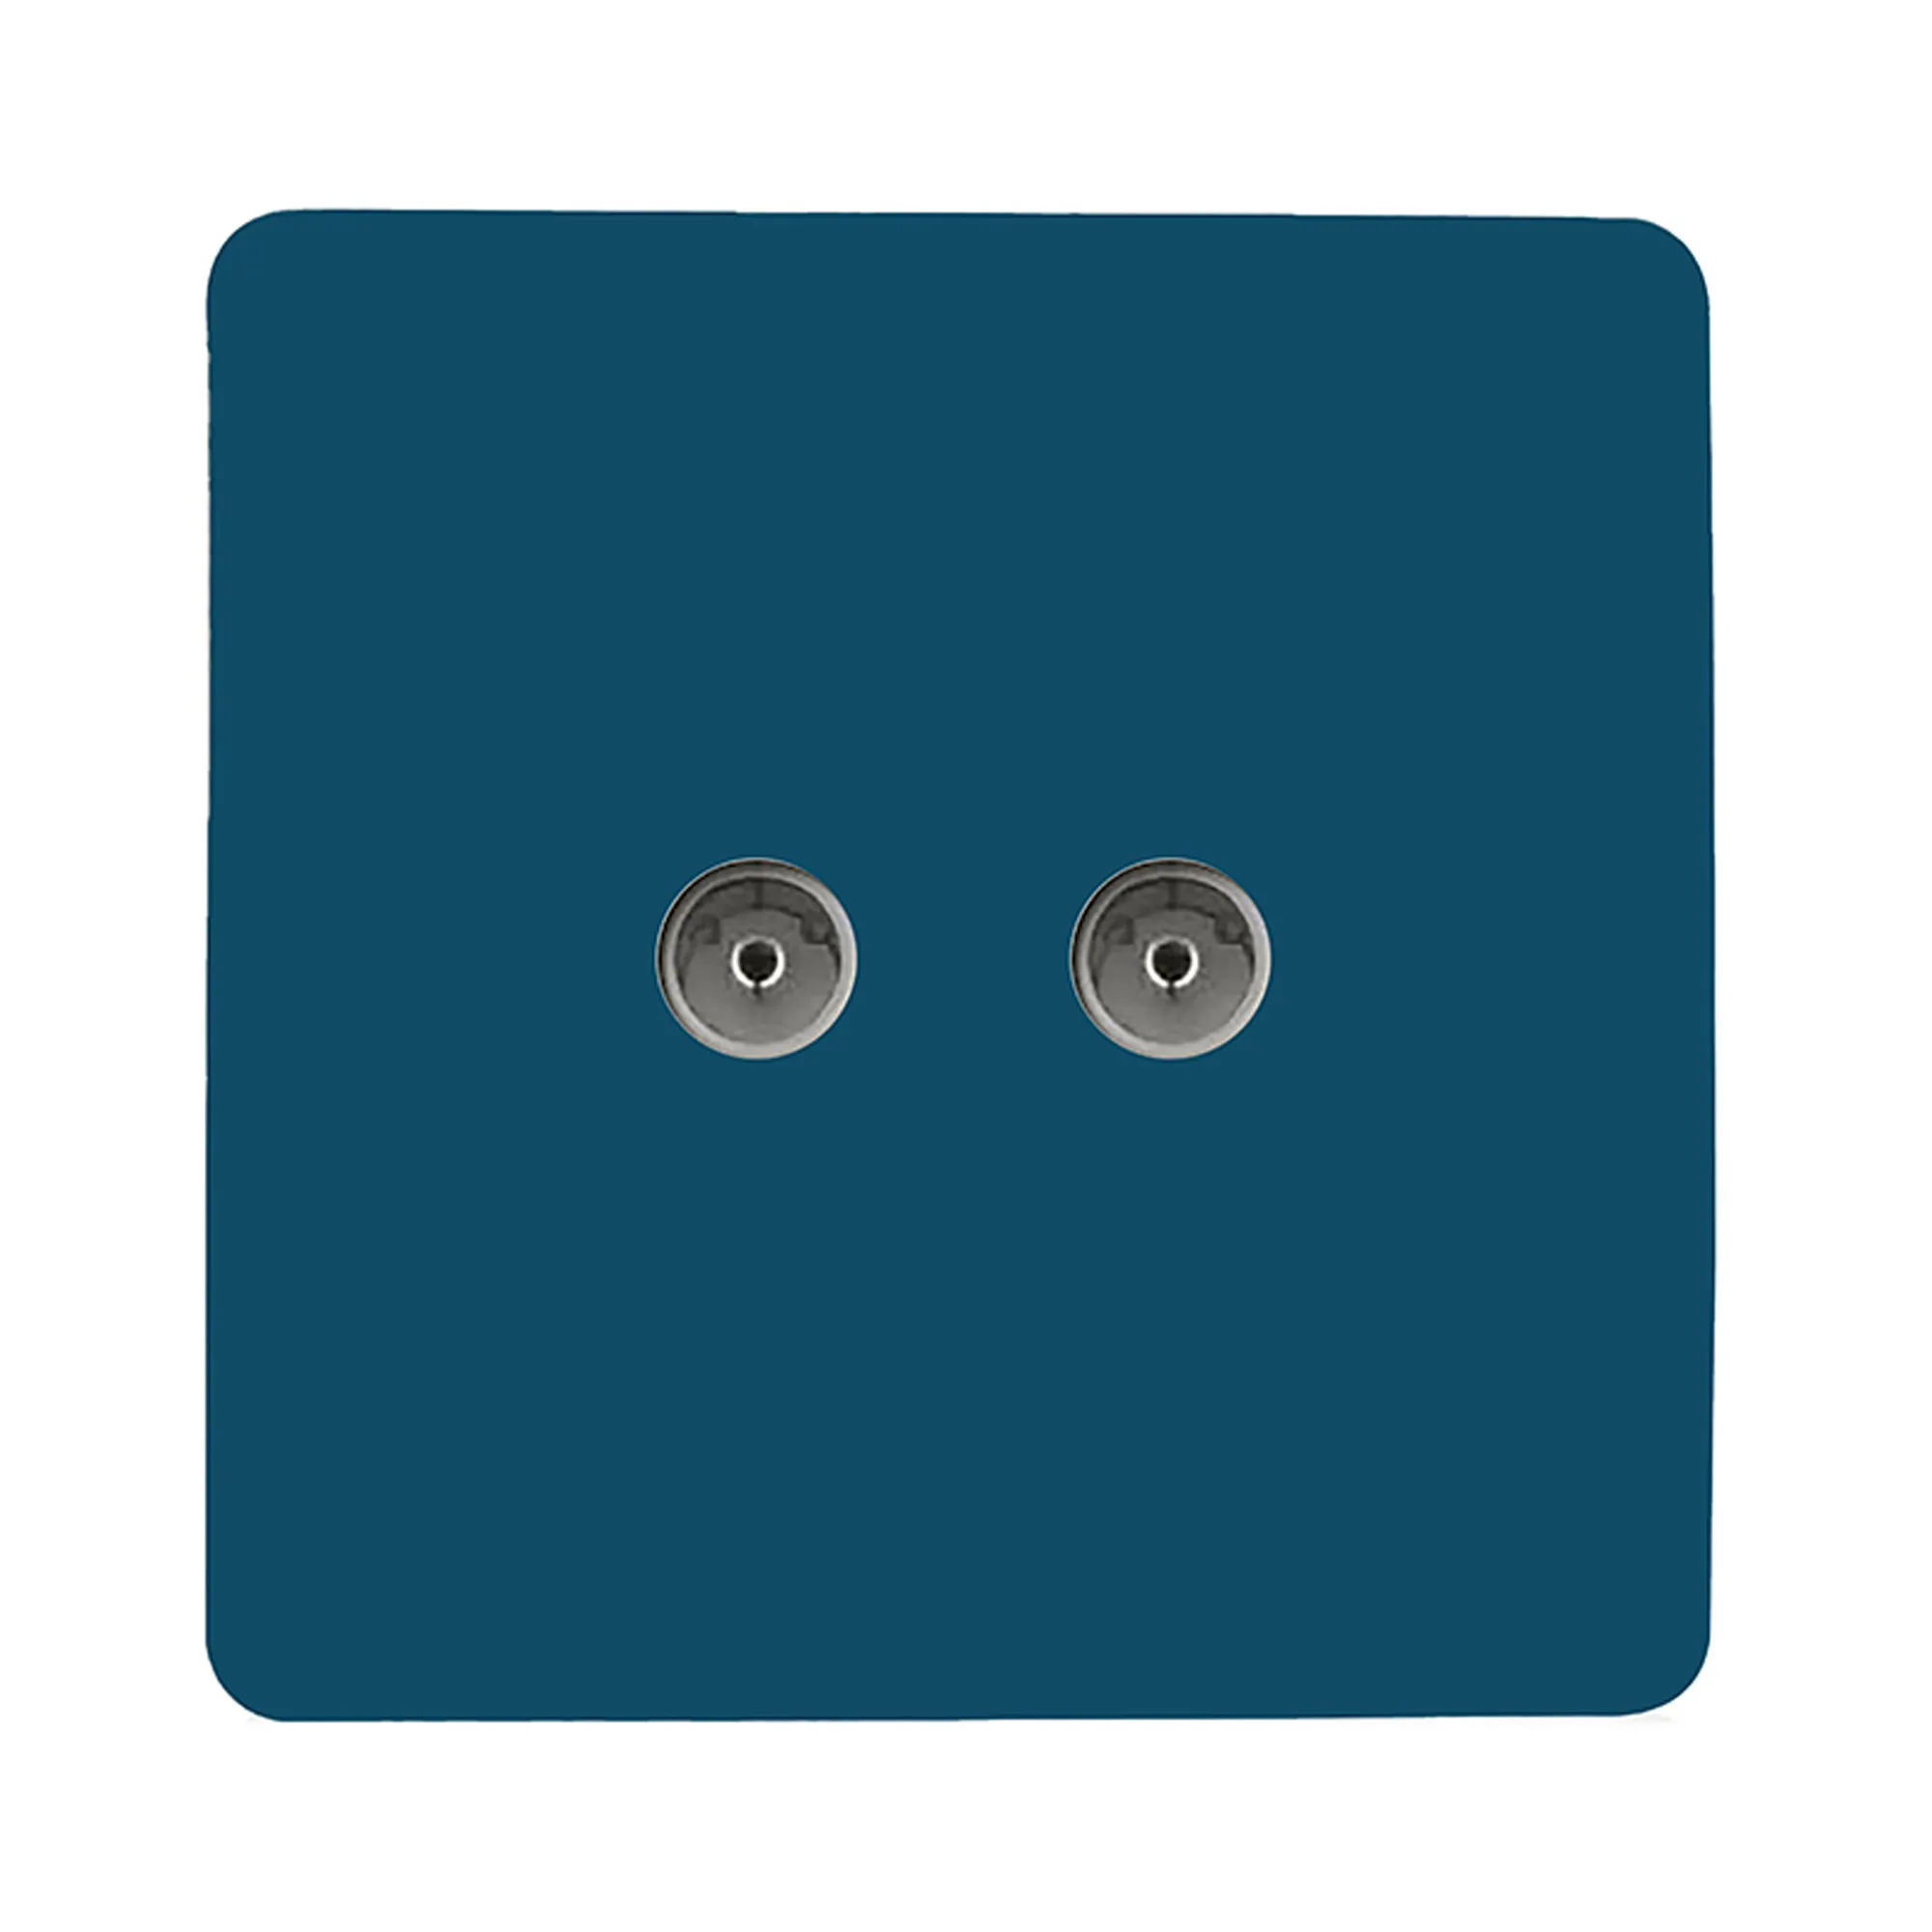 Twin TV Co-Axial Outlet Midnight Blue